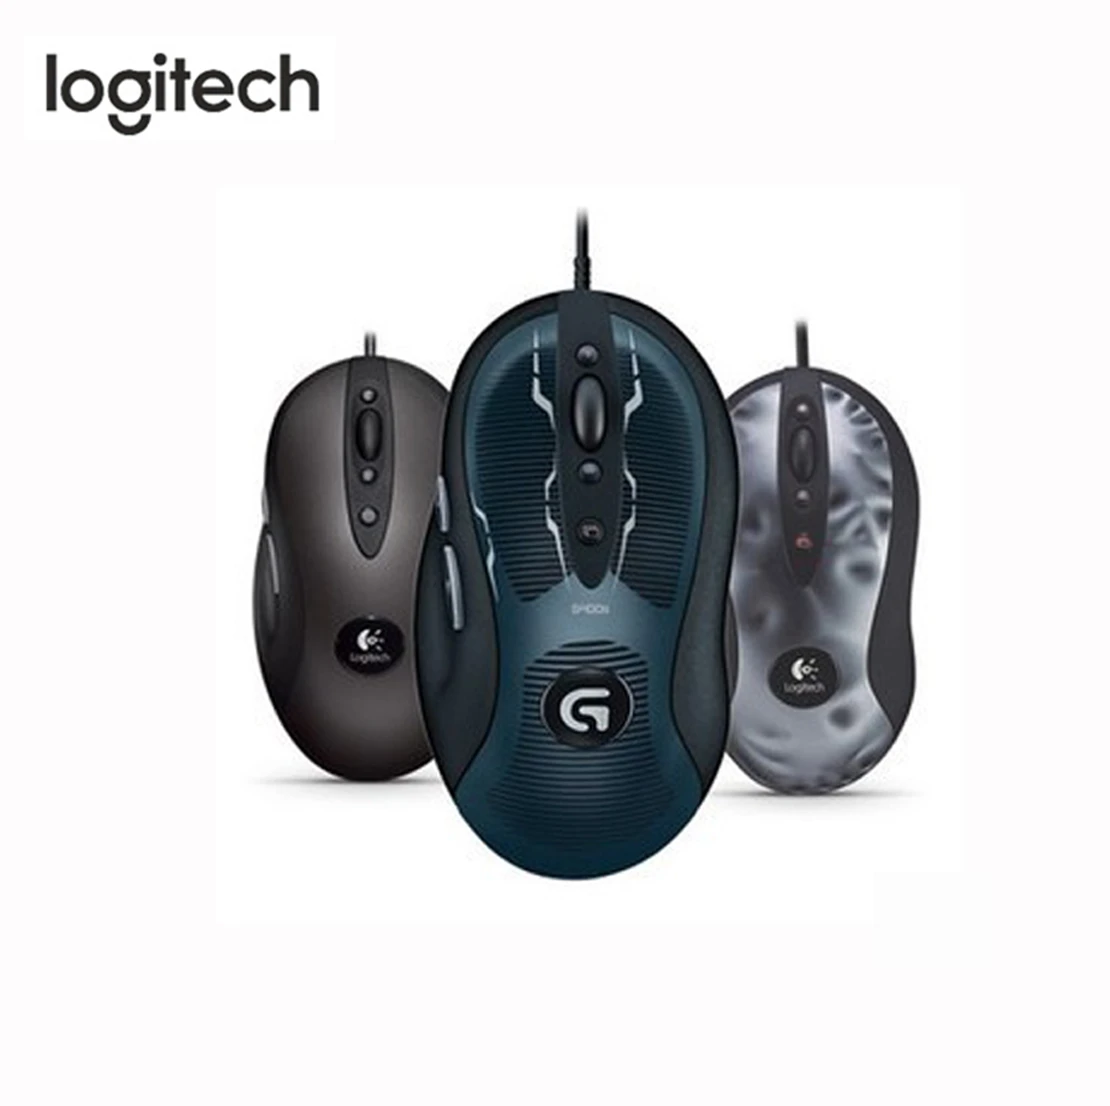 Original Logitech MX518 G400s Legendary Gaming Mouse with HERO Engine 16000DPI Classic Mouse Legend Reborn for Mouse Gamer gaming mouse for laptop